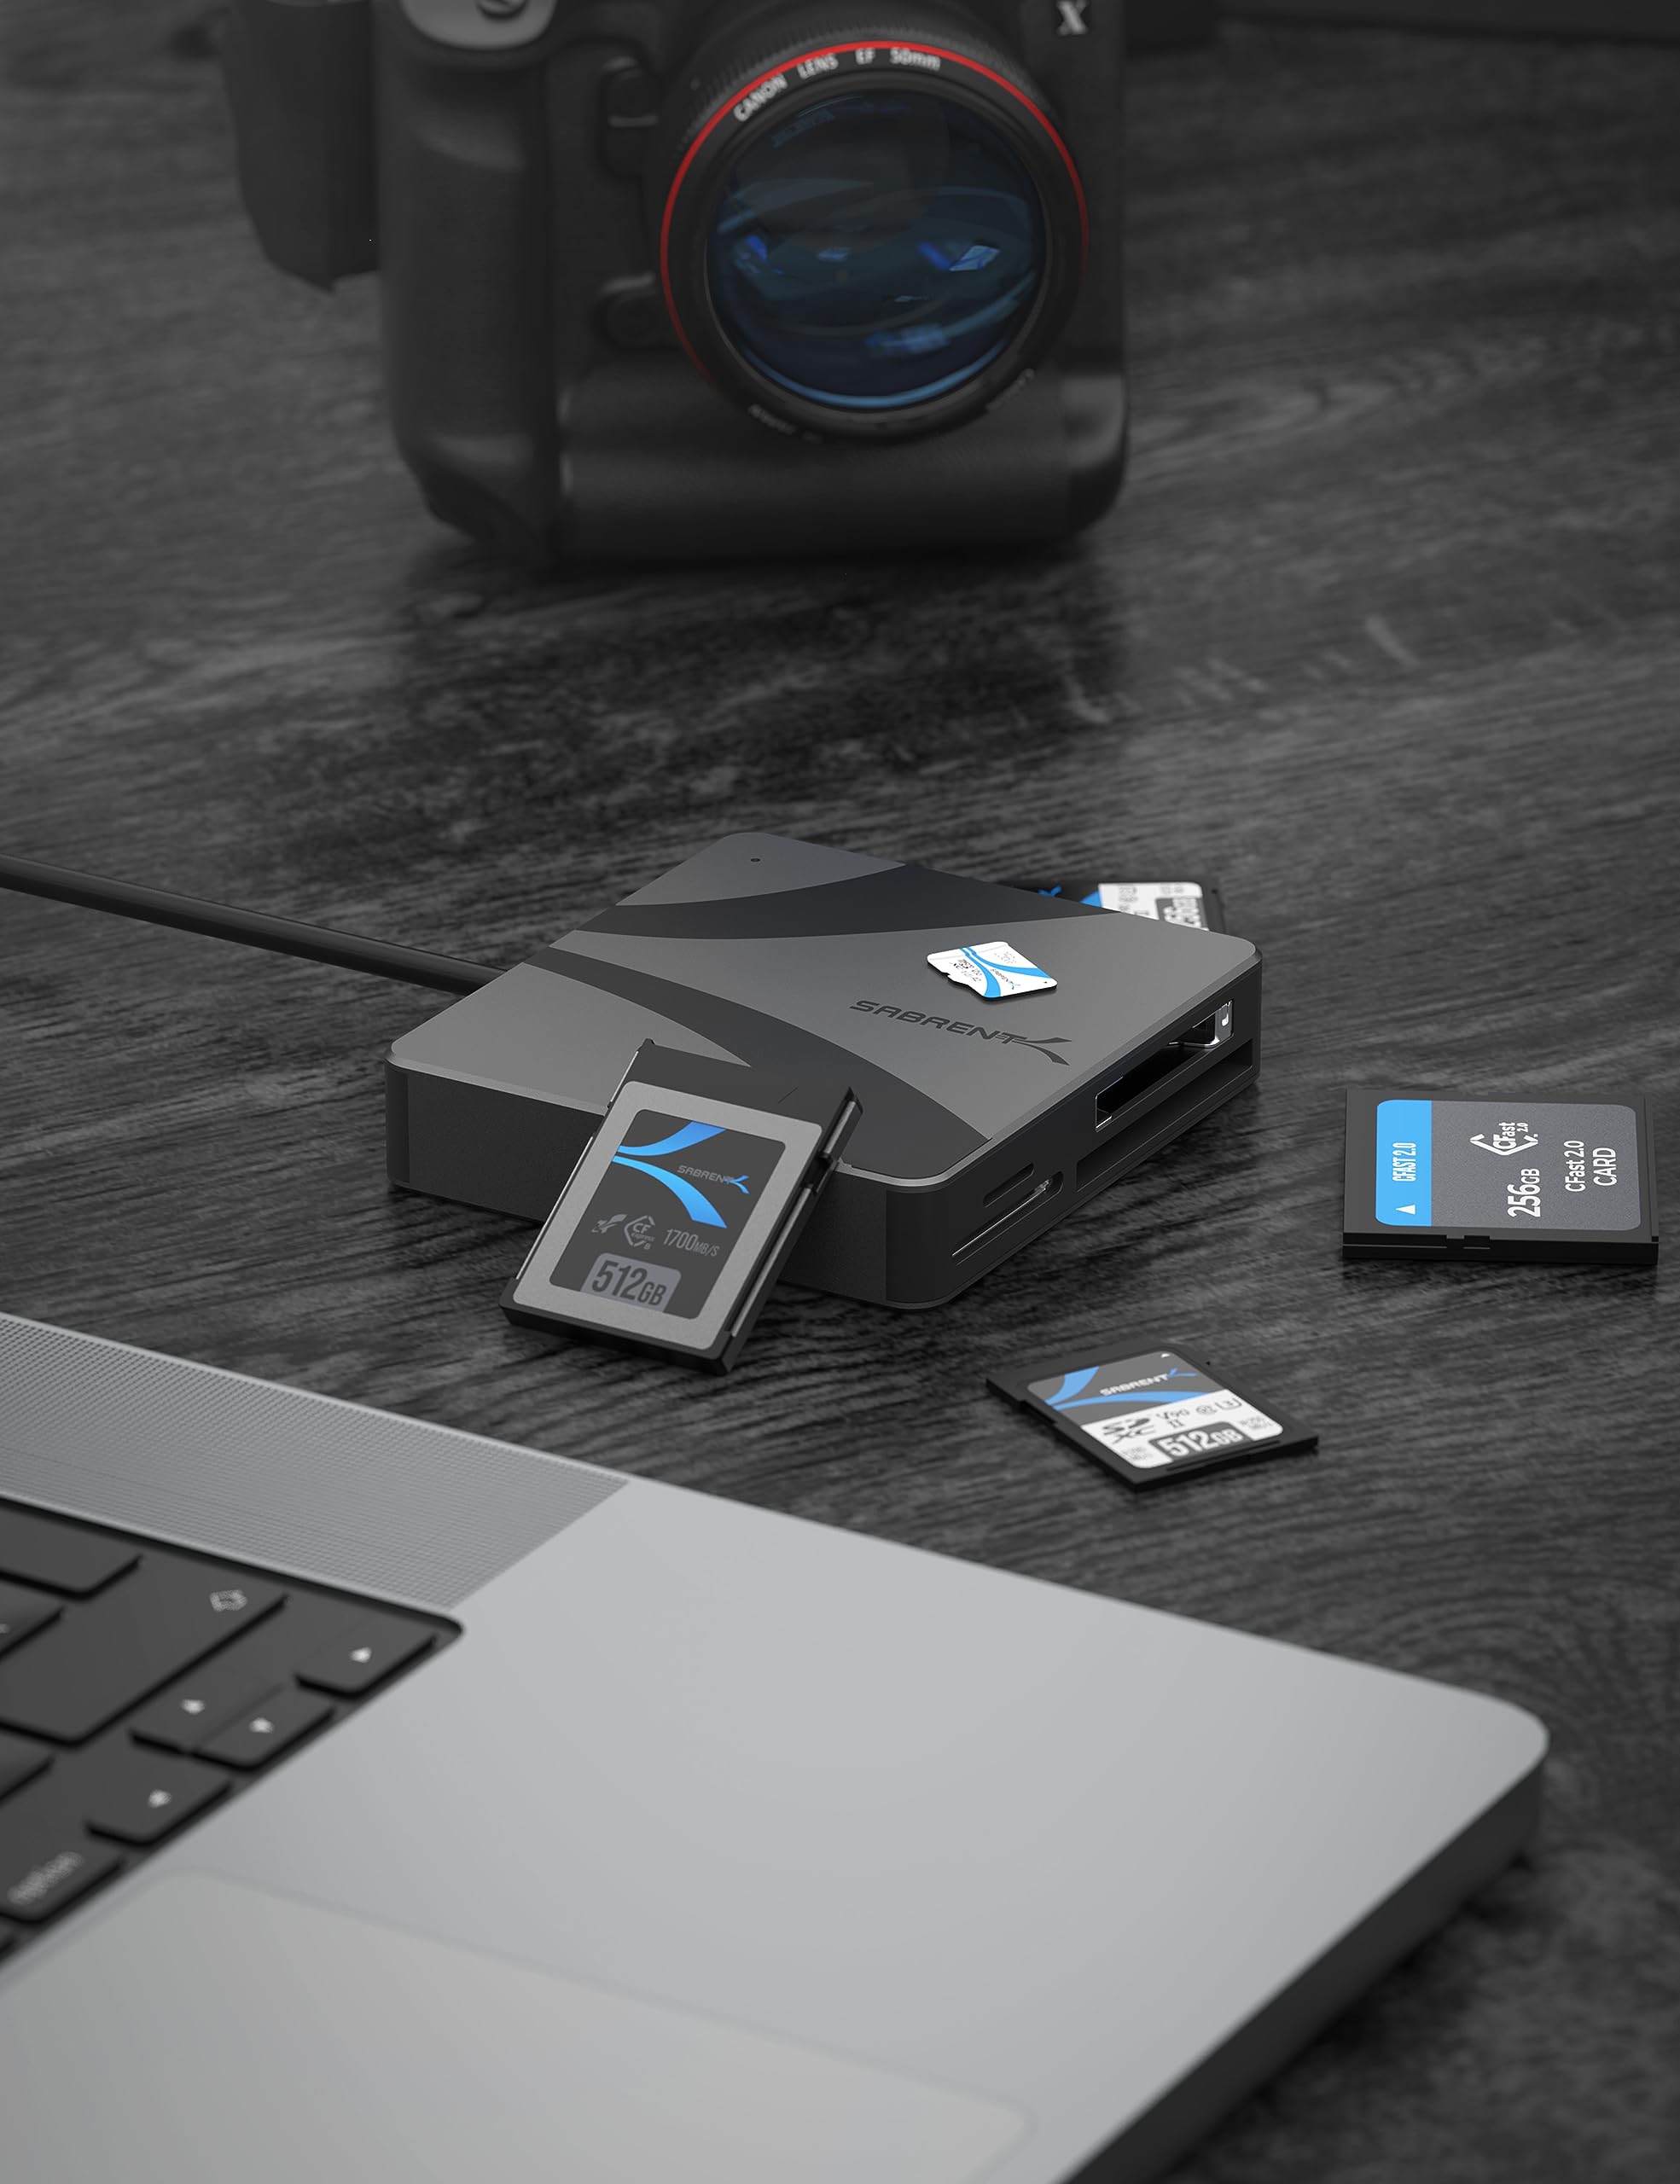 SABRENT USB-C Multi-Card Reader for CFexpress Type B, CFast 2.0, and microSD/SD Cards (CR-C4PM)